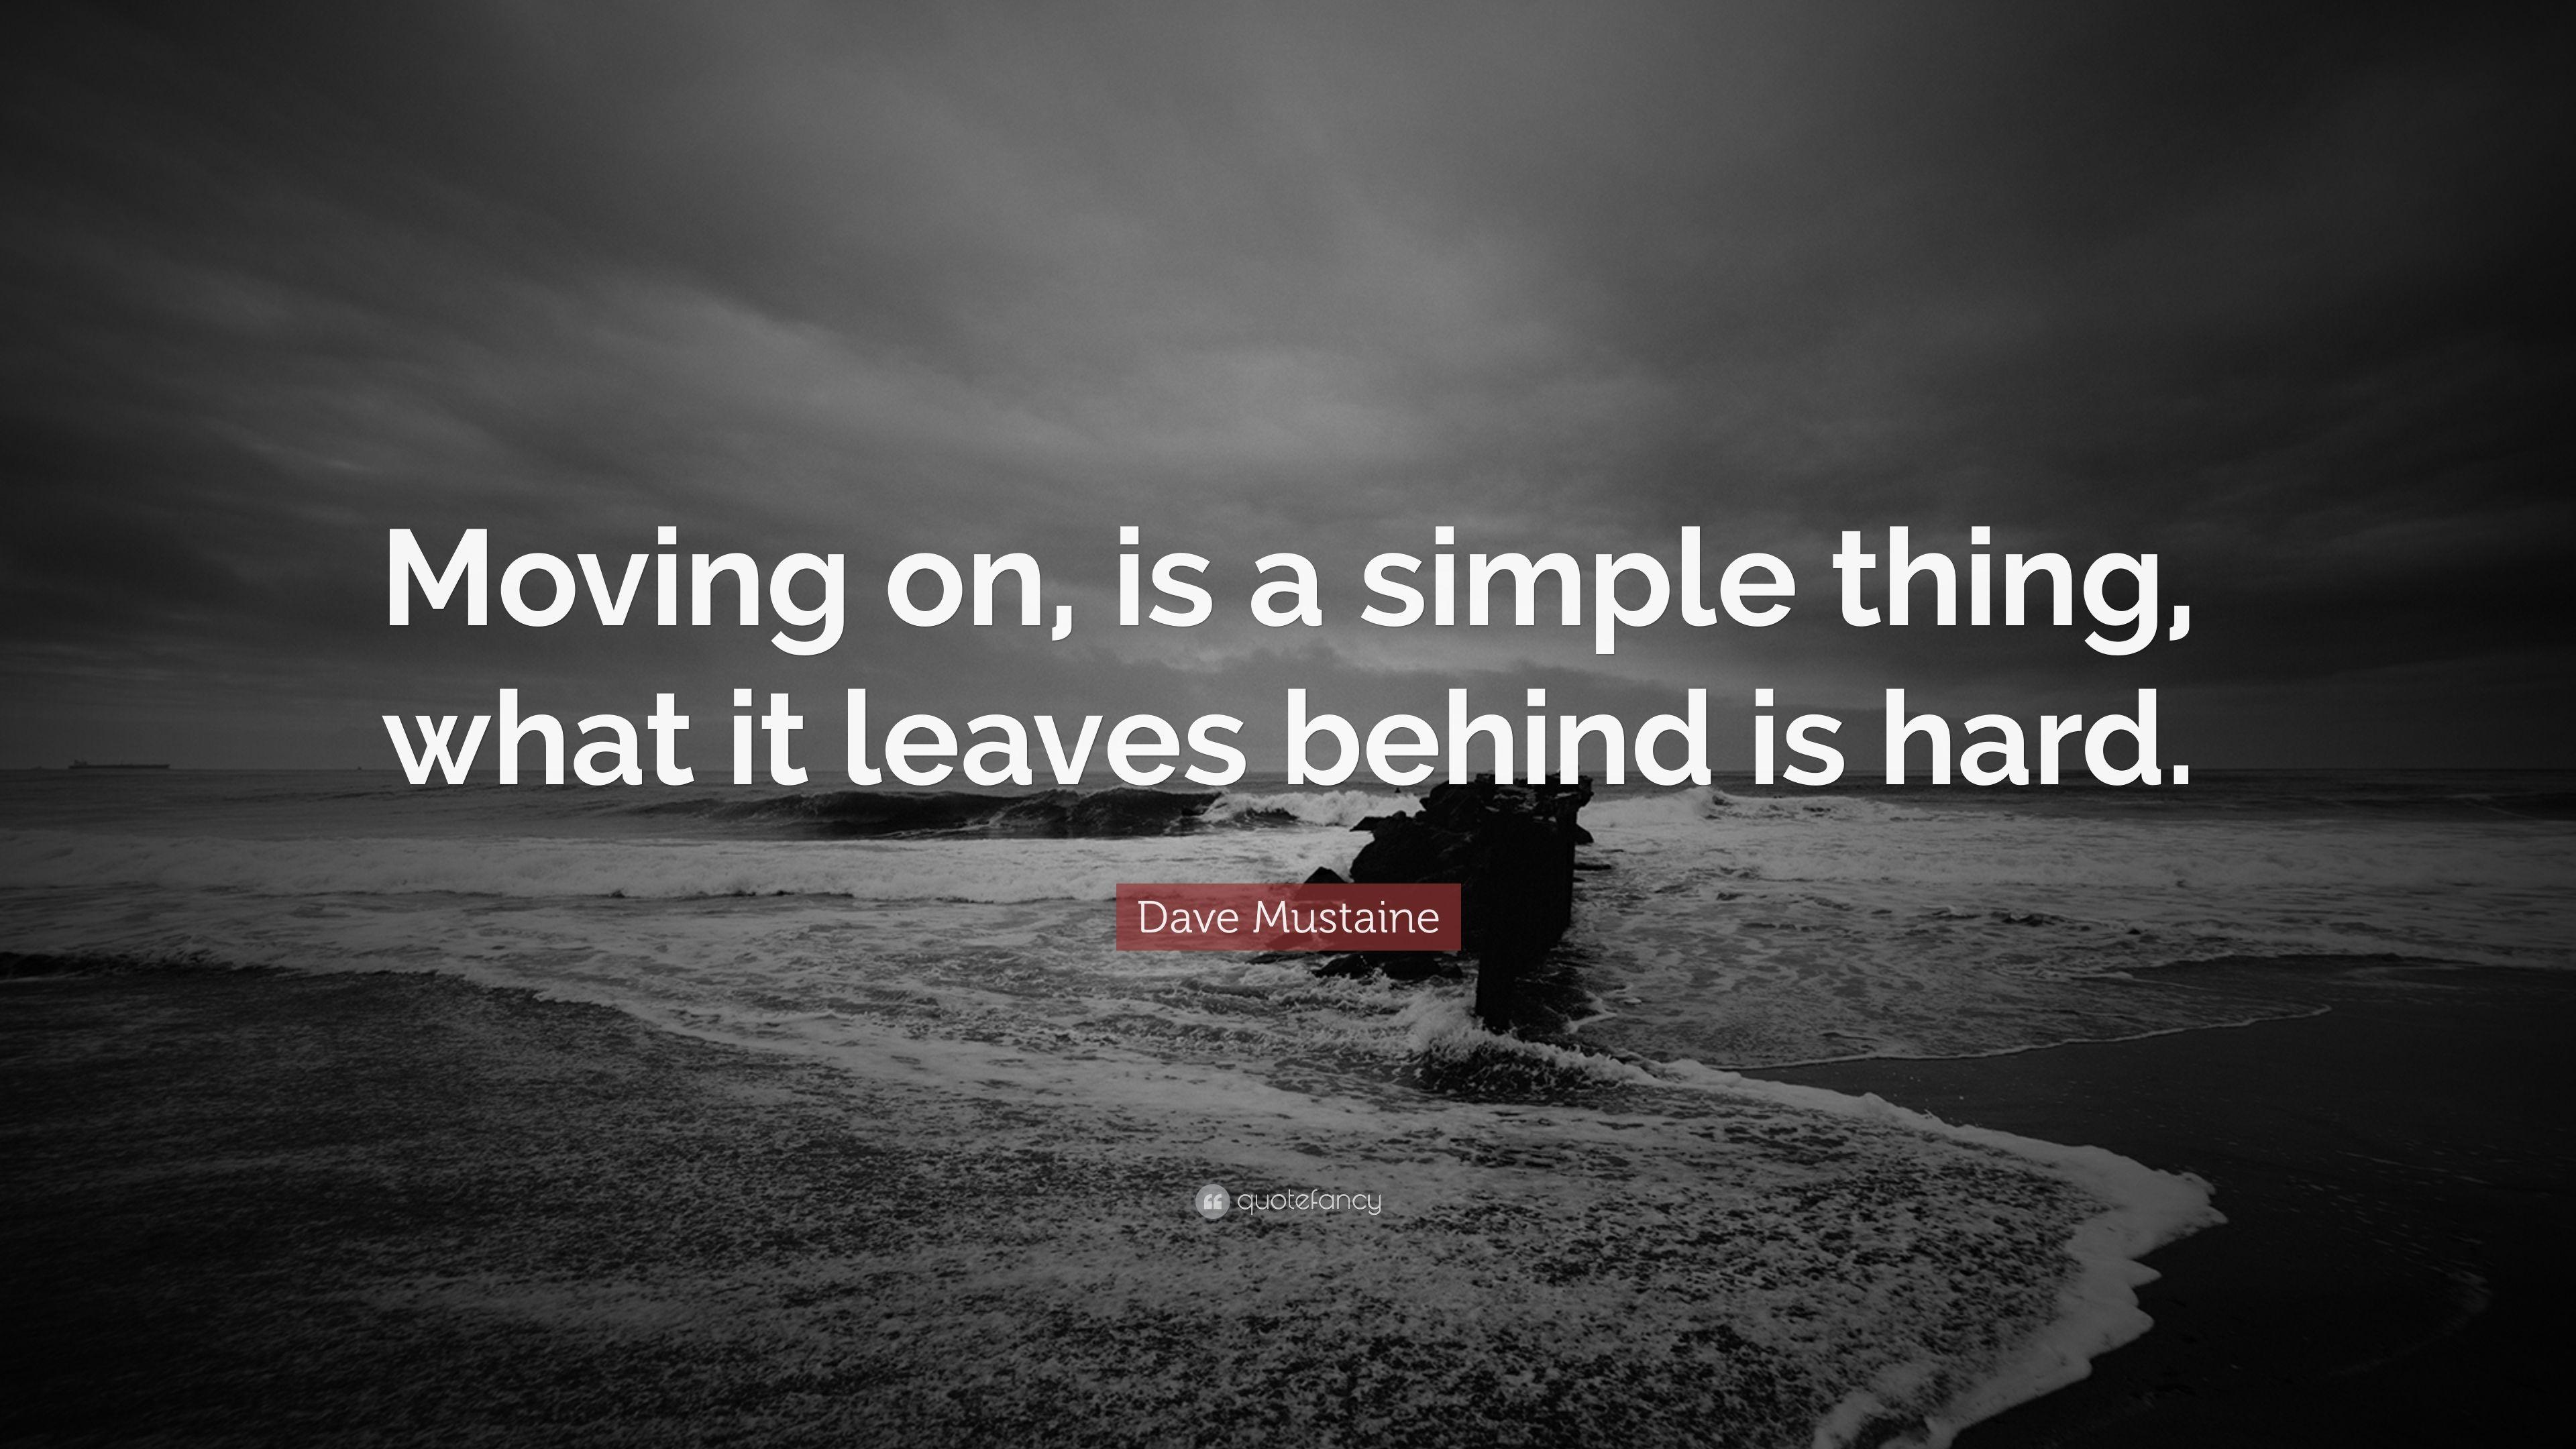 Dave Mustaine Quote: “Moving on, is a simple thing, what it leaves